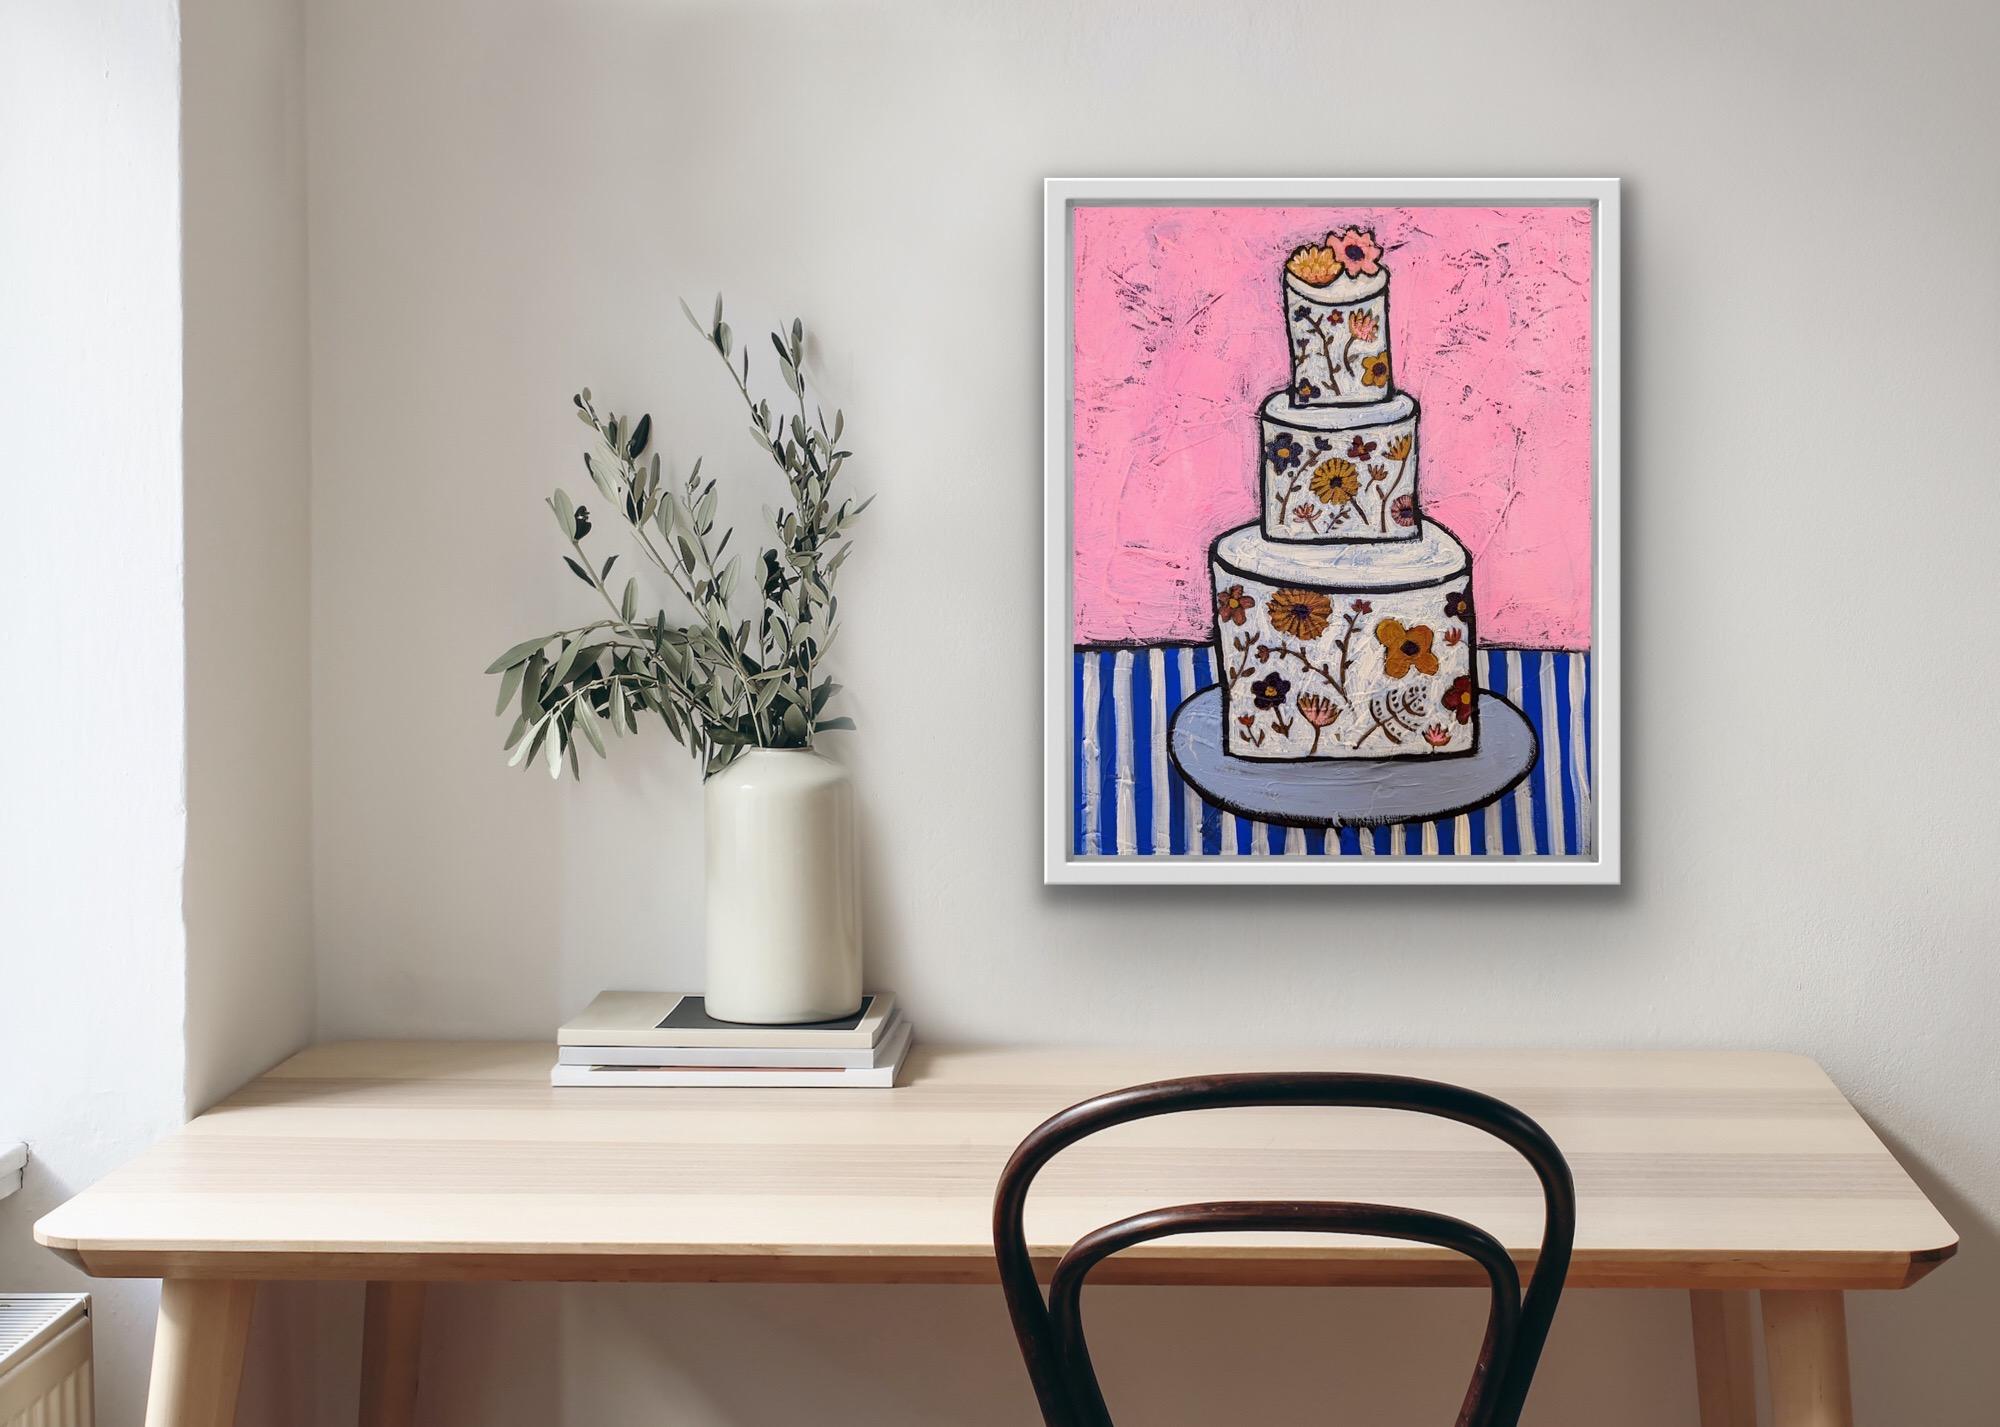 A joyful depiction of a towering celebration cake decorated in edible wild flowers. This painting has a great deal of texture, vibrancy and character.
Kerry Louise Bennett, artist and painter, has original artworks available with Wychwood Art in our